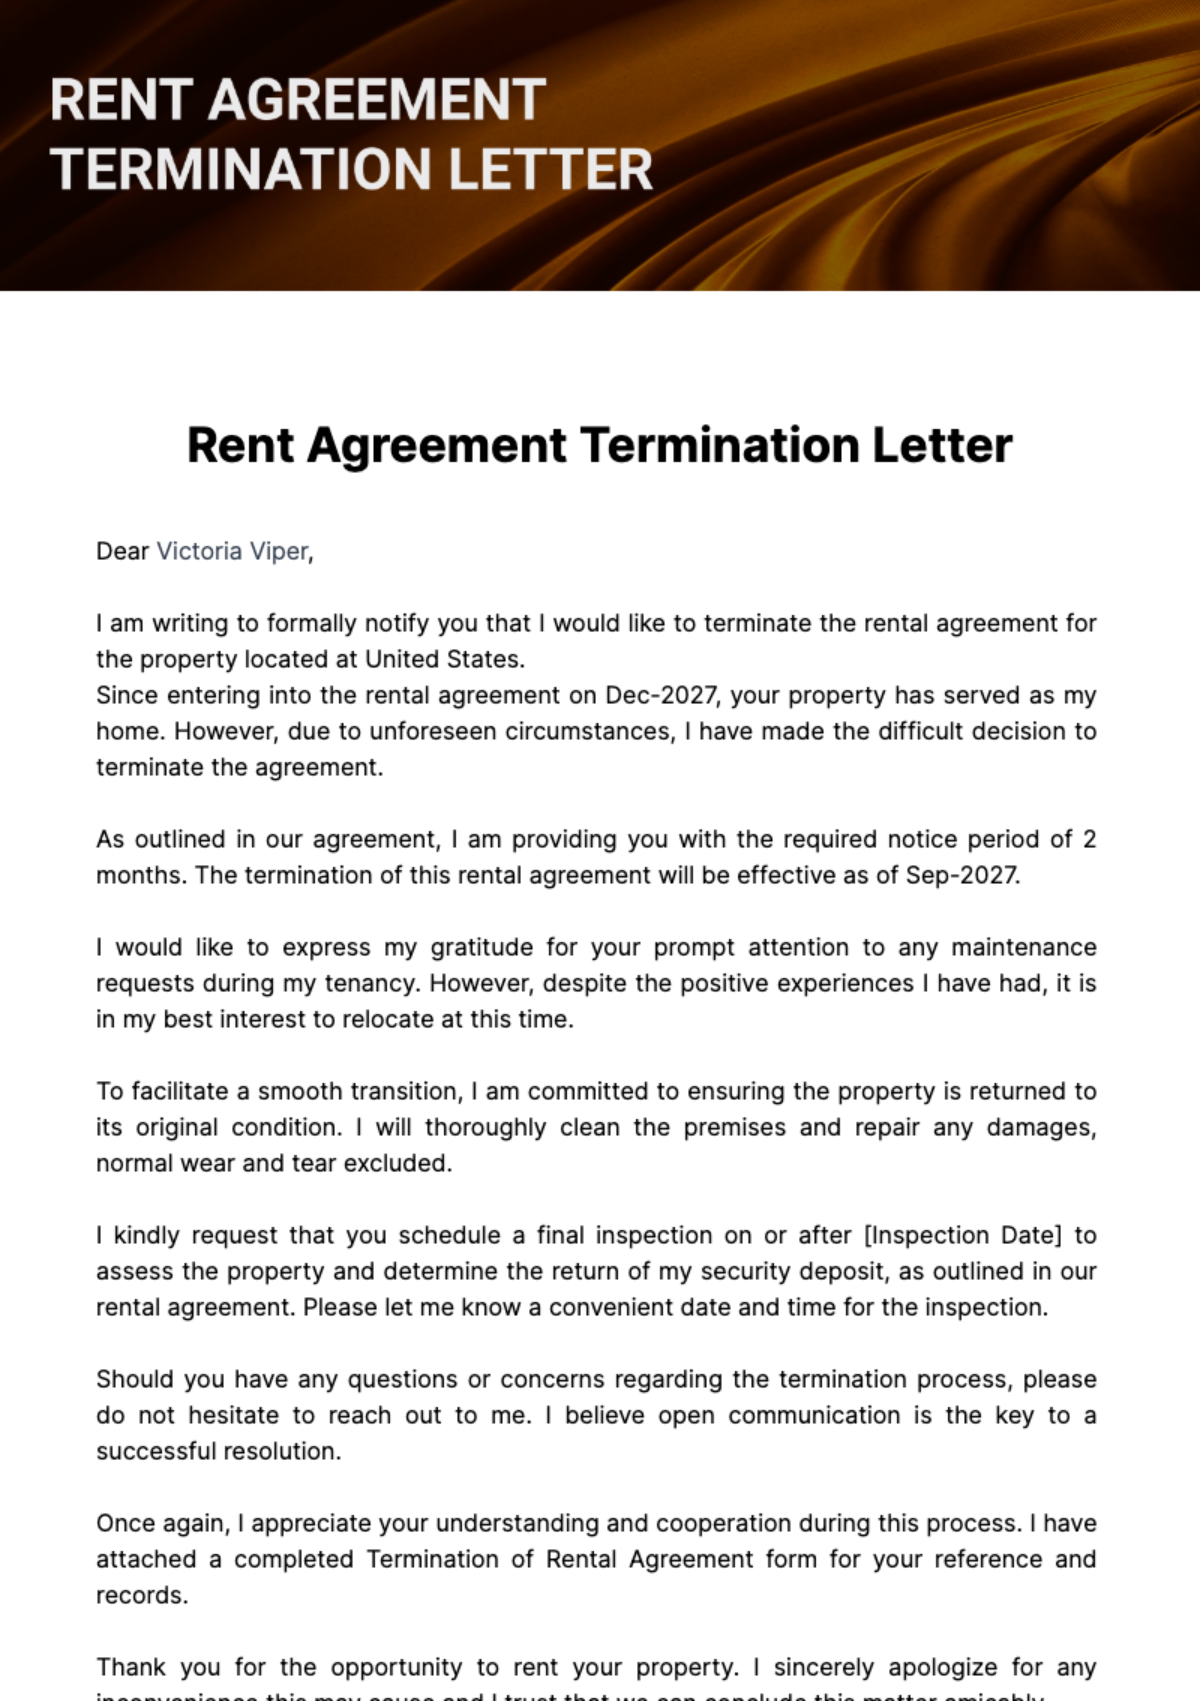 Rent Agreement Termination Letter Template